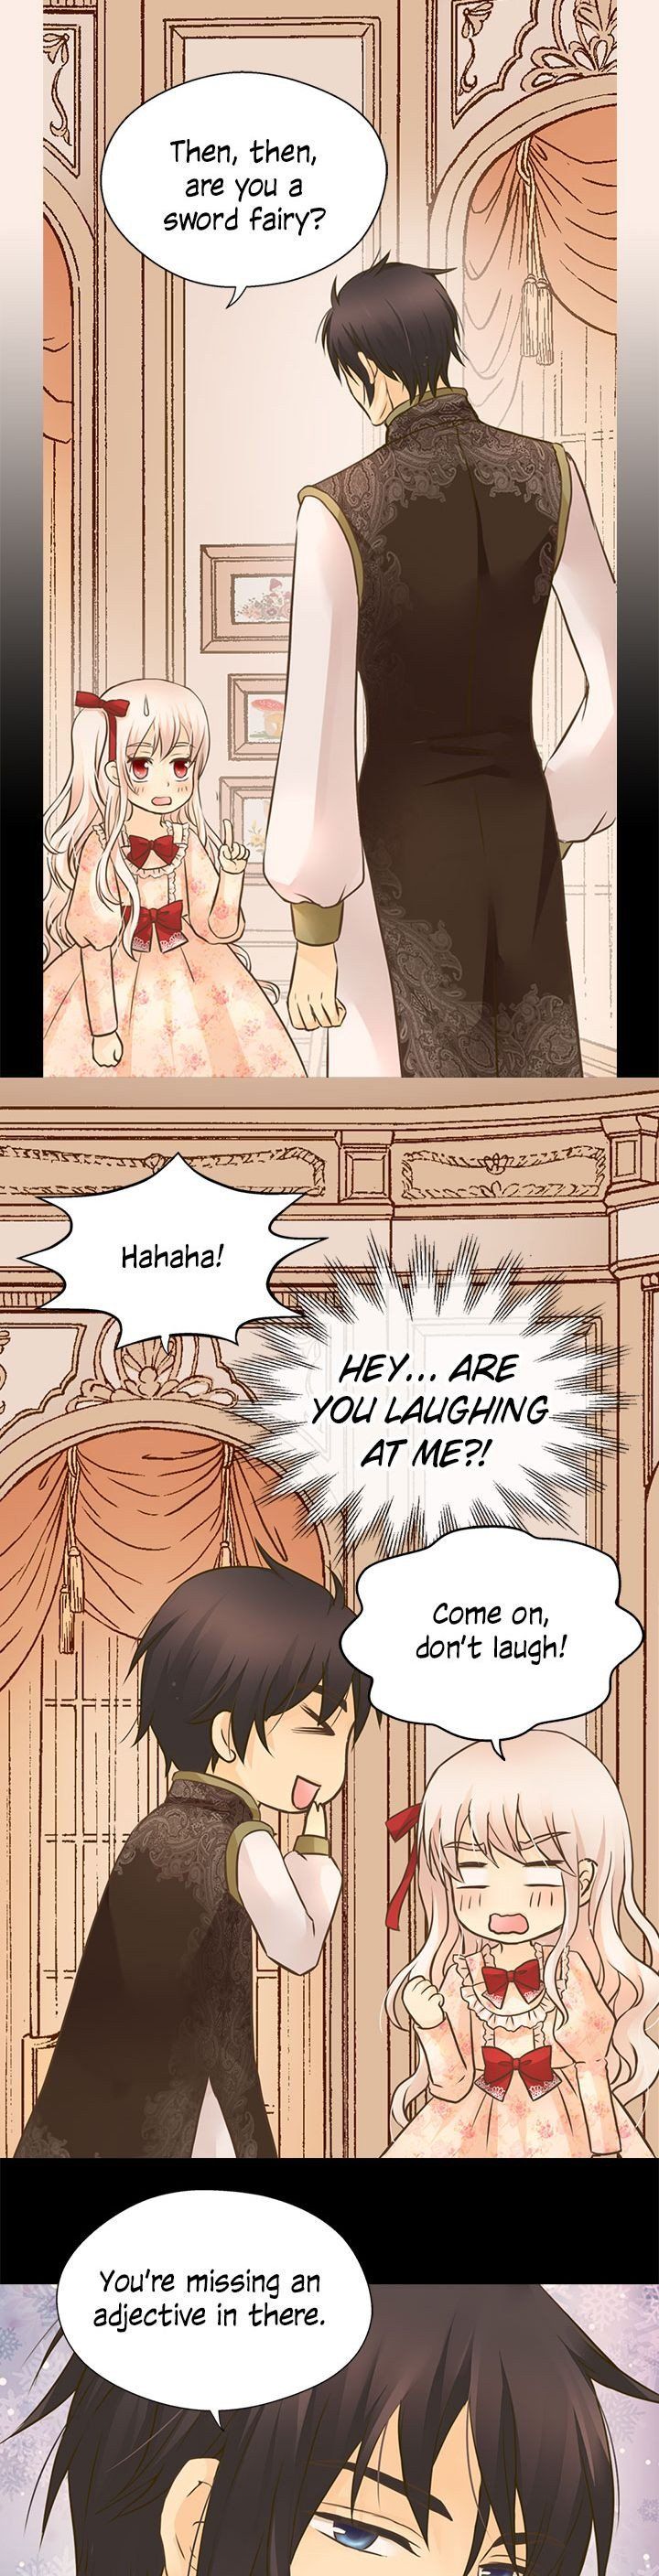 Daughter of the Emperor Chapter 130 page 2